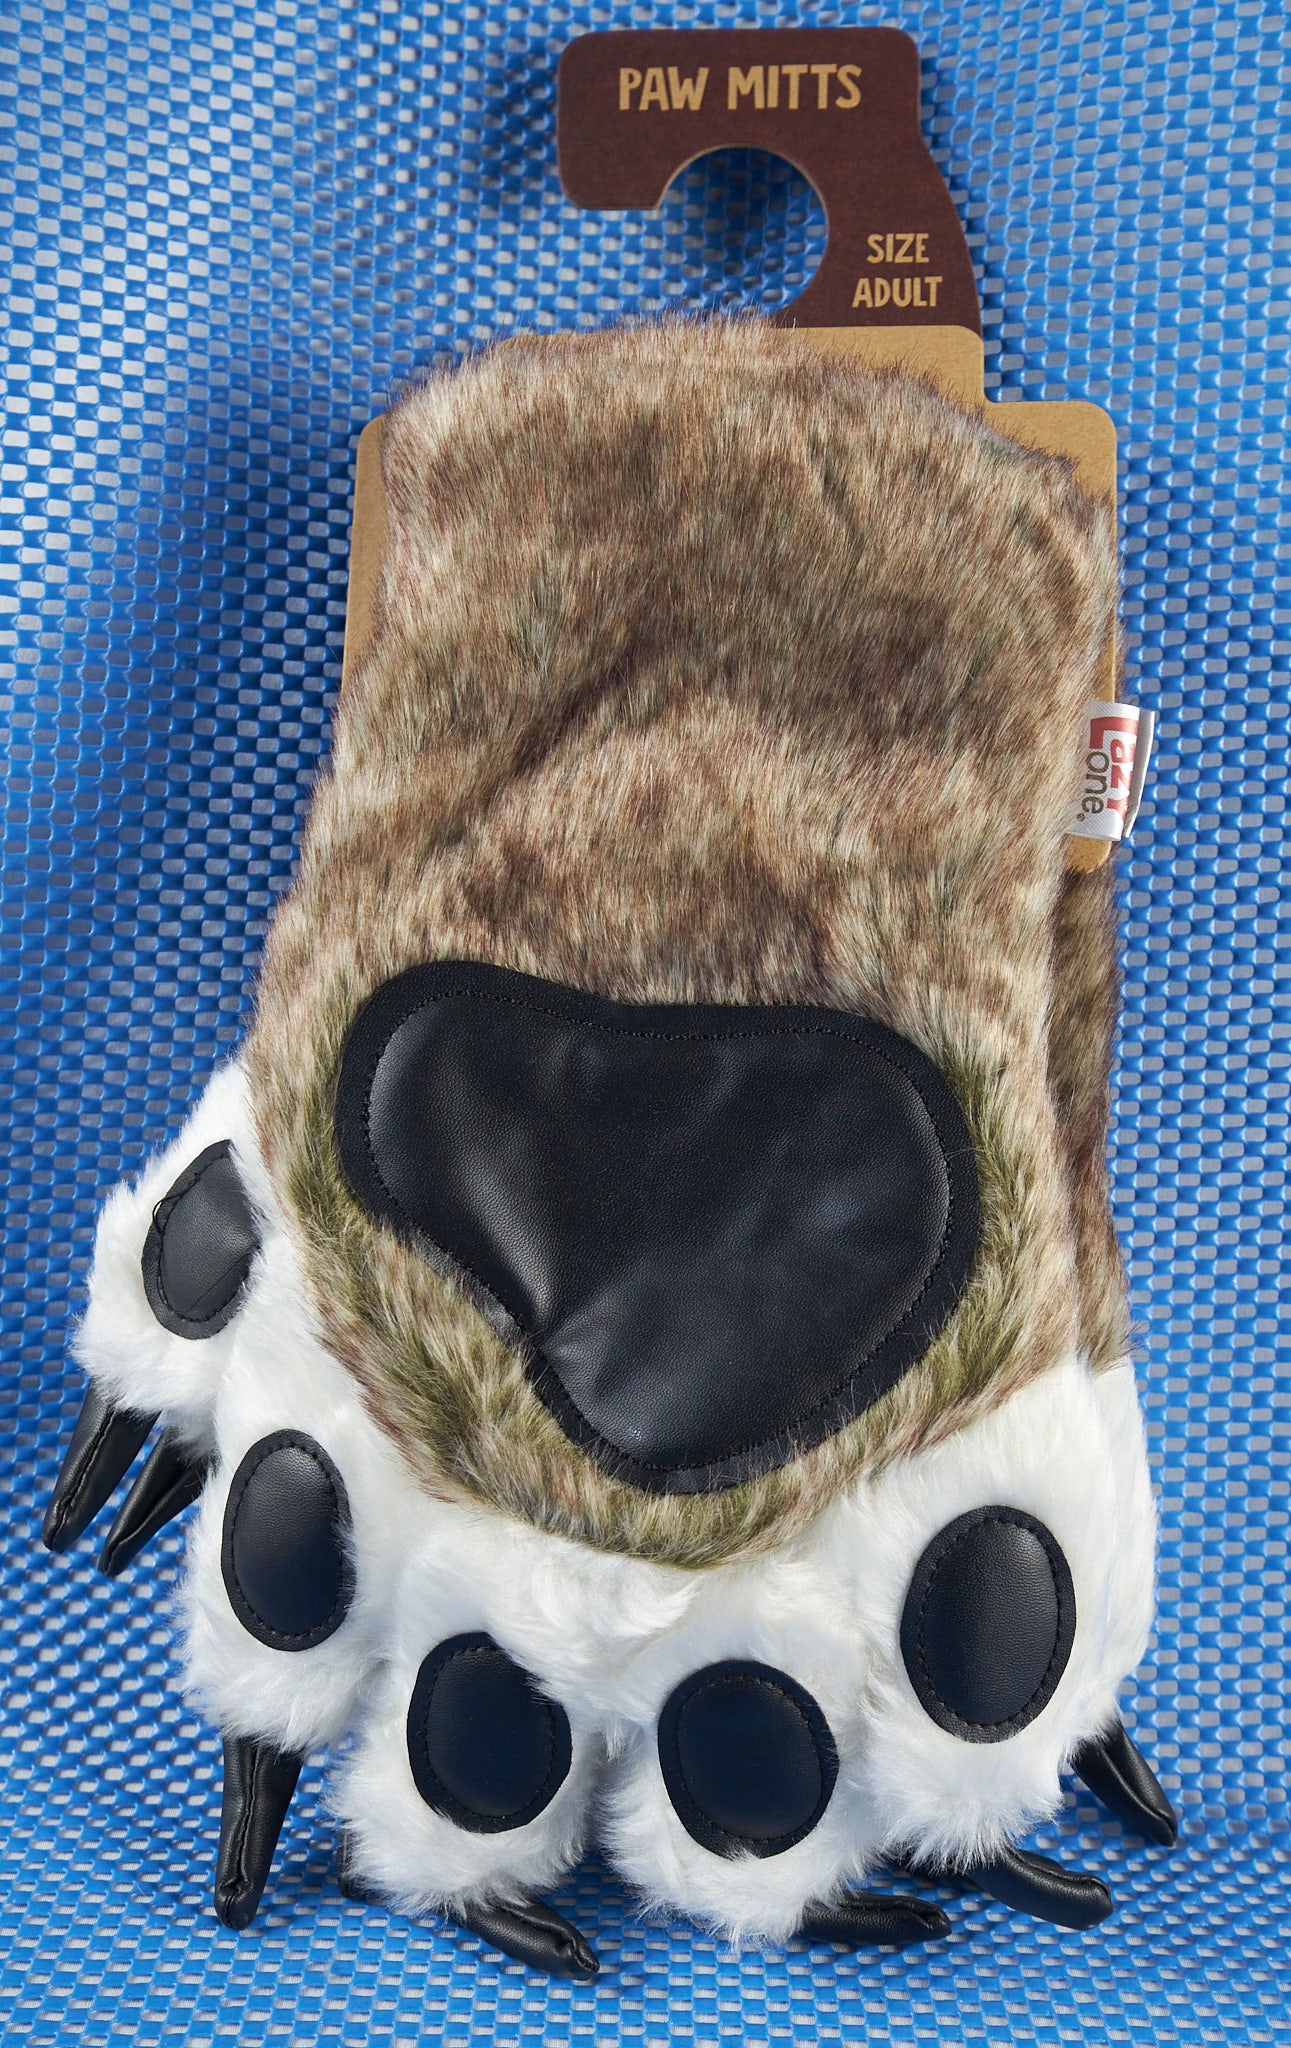 Animal Paw Oven Mitts: The Cutest Oven Mitts You Will See - Gift Canyon